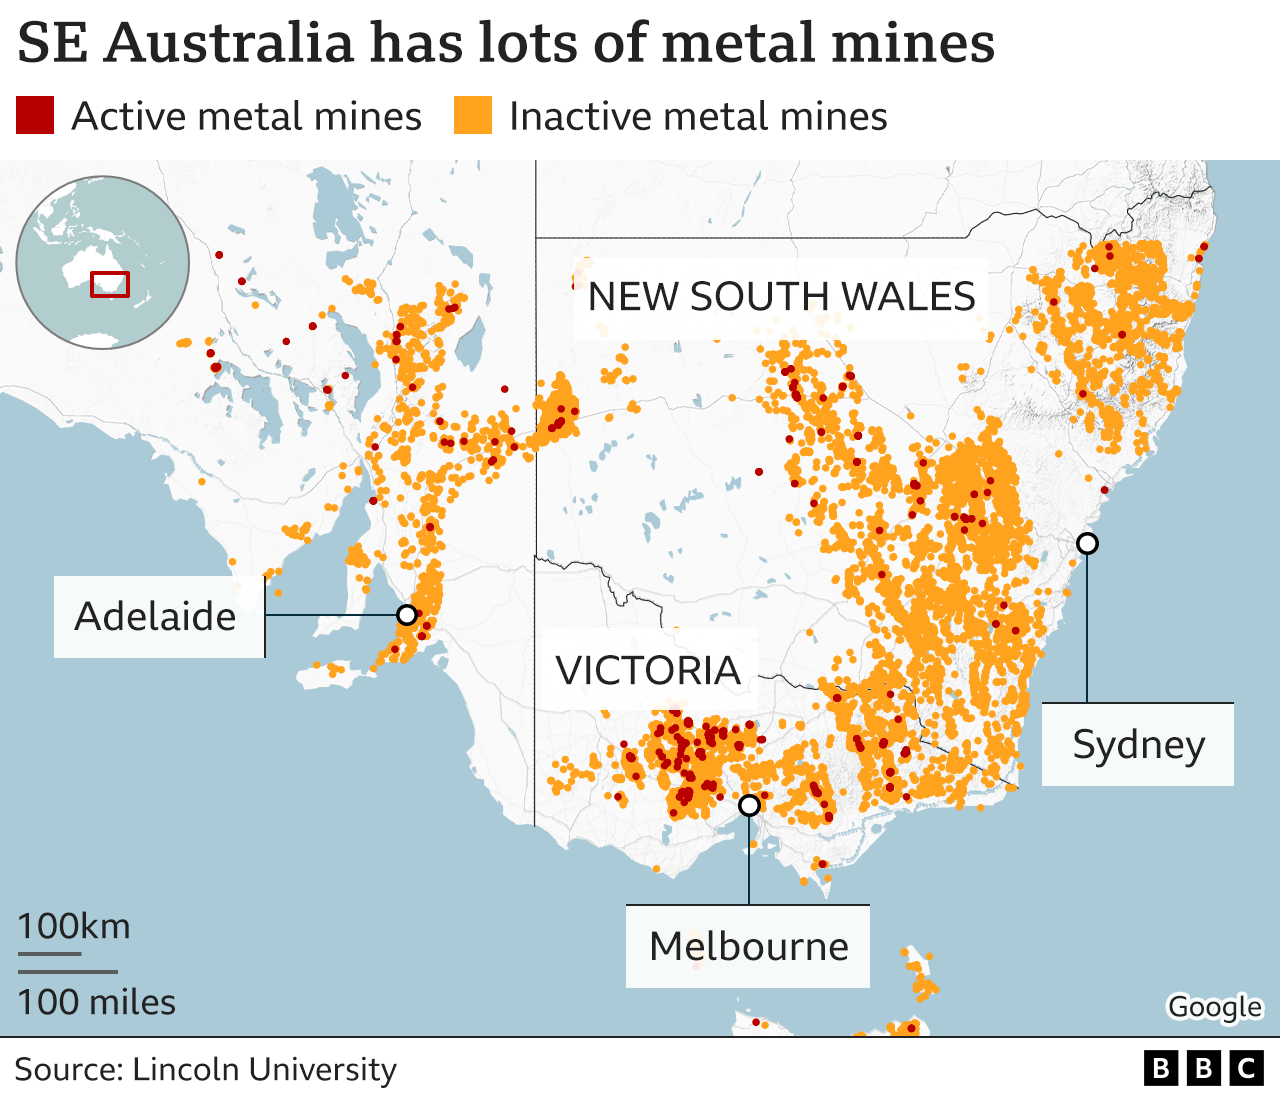 A map of south eastern Australia showing where active and inactive metal mines are located. There is a large cluster around Melbourne in the state of Victoria and also south west of Sydney in New South Wales. The majority of them are inactive.